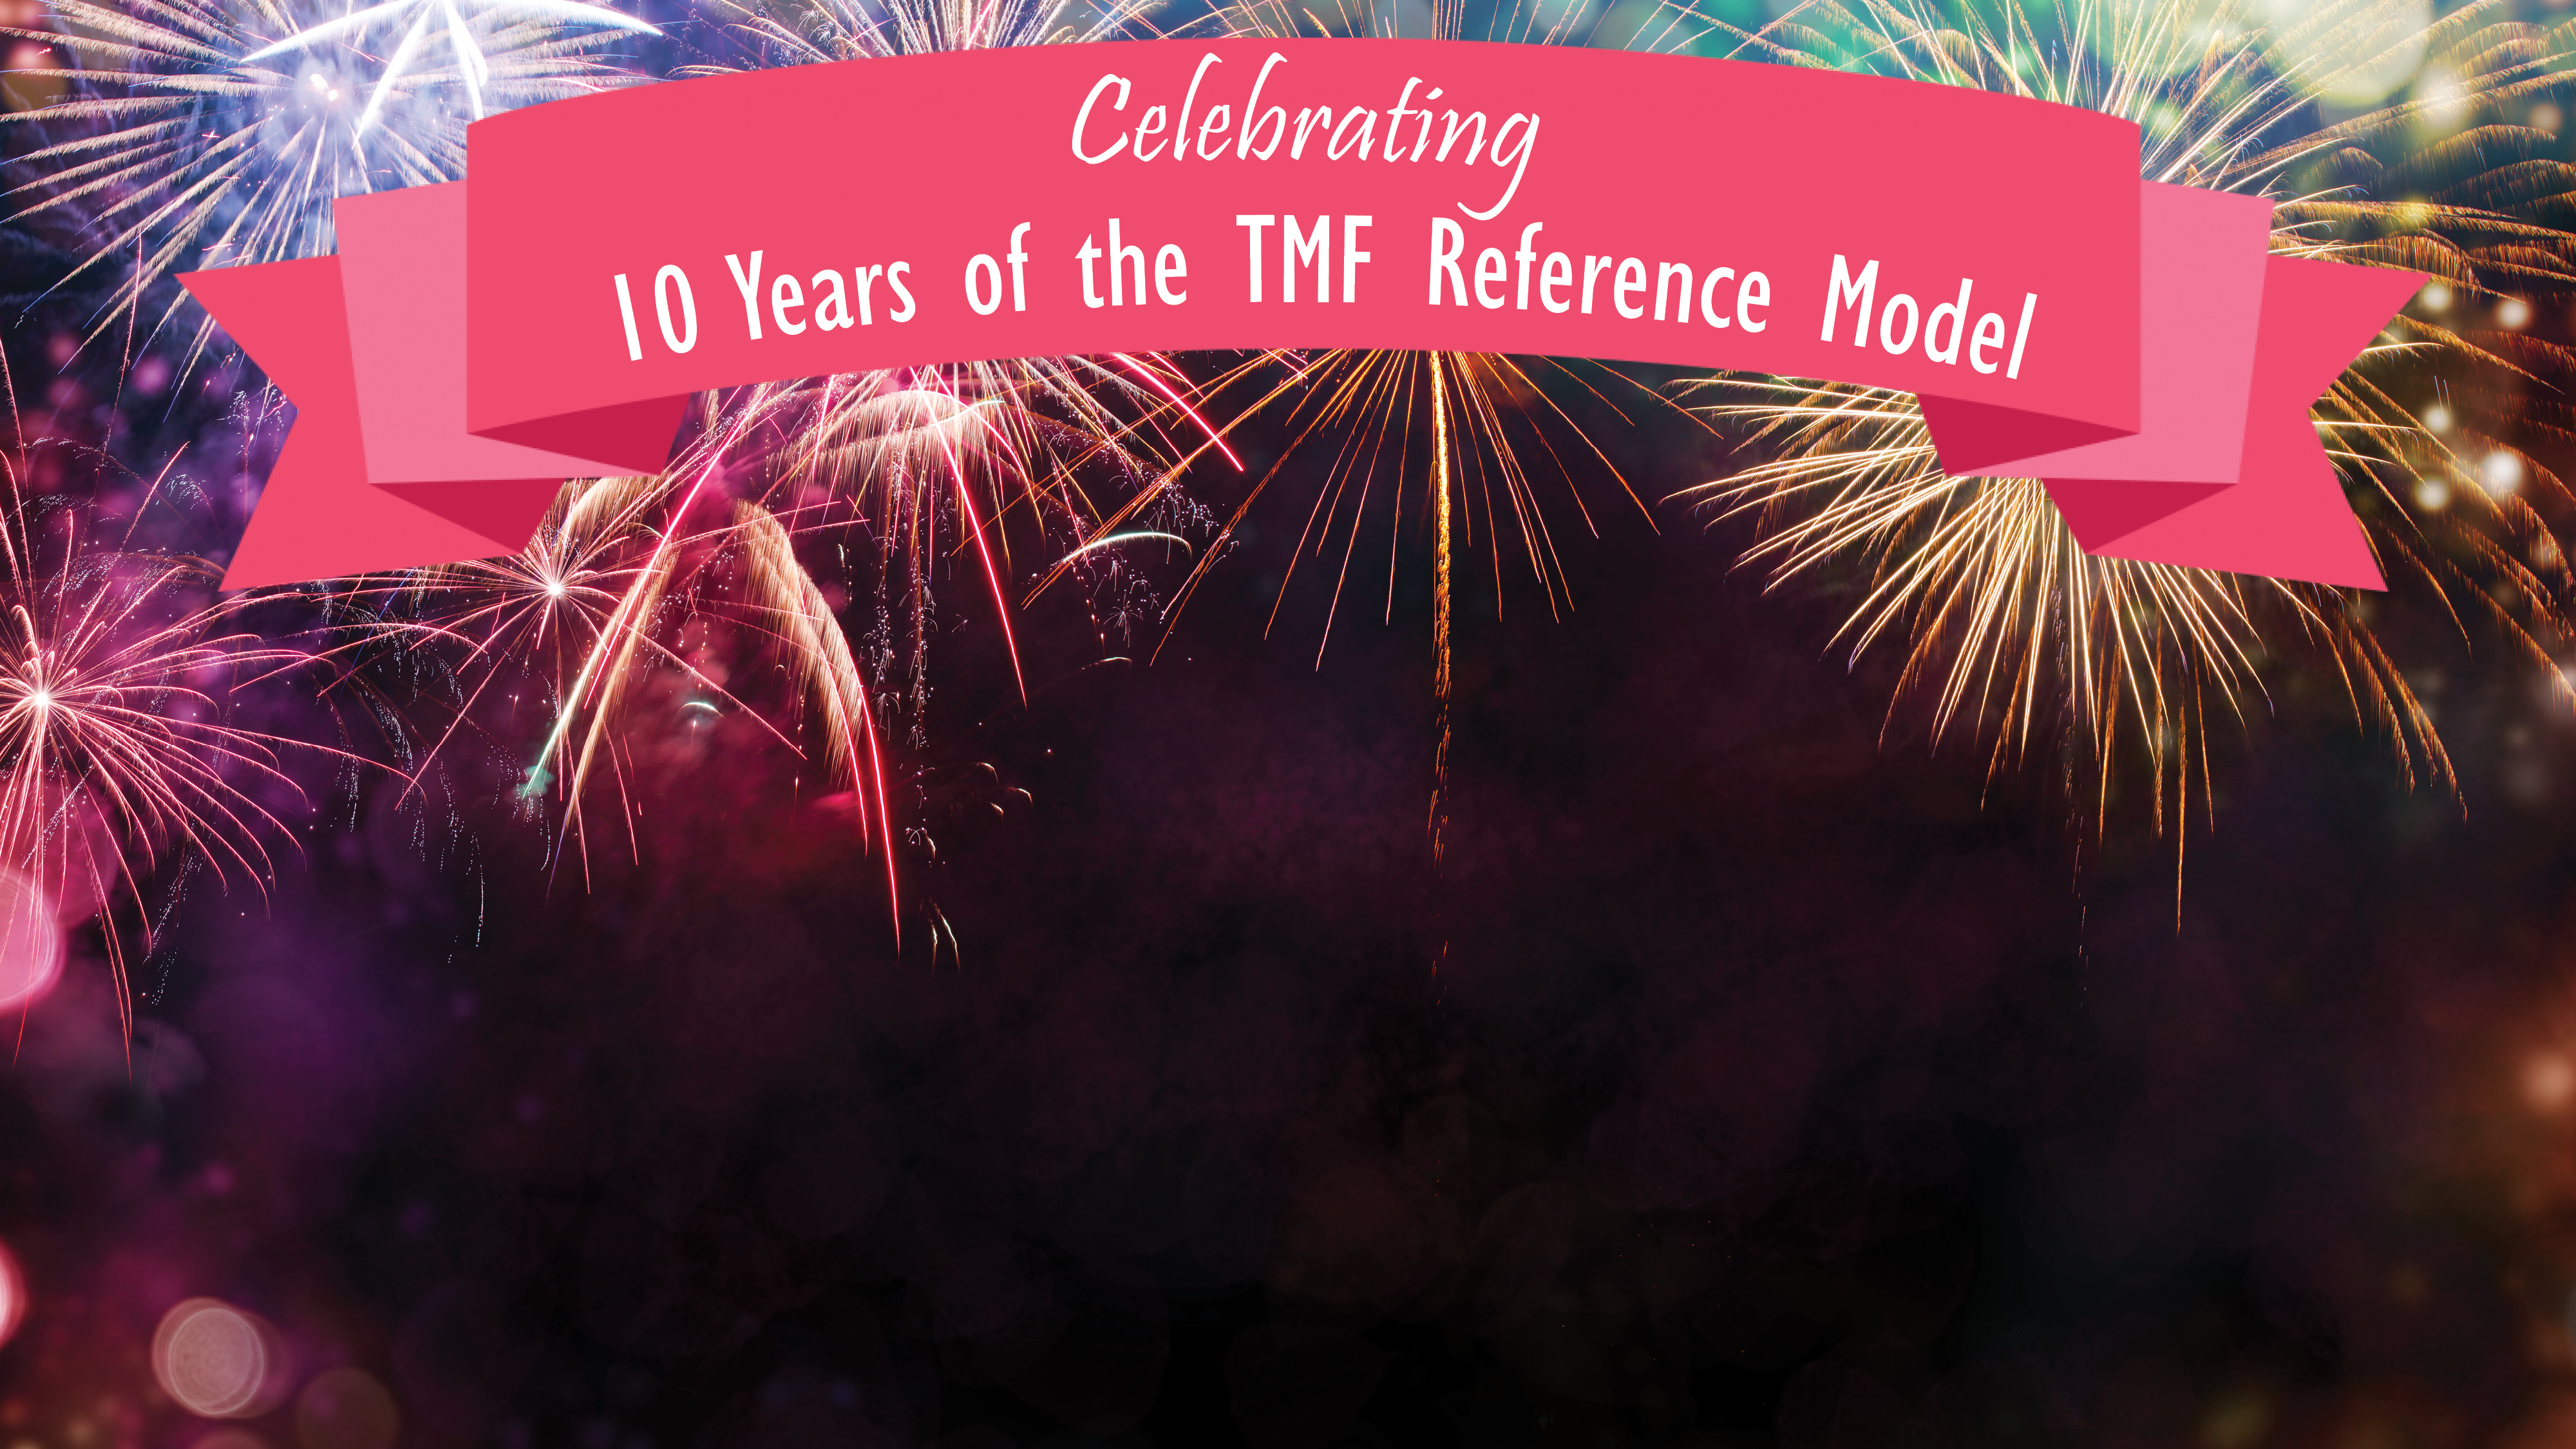 TMF Reference Model Background3